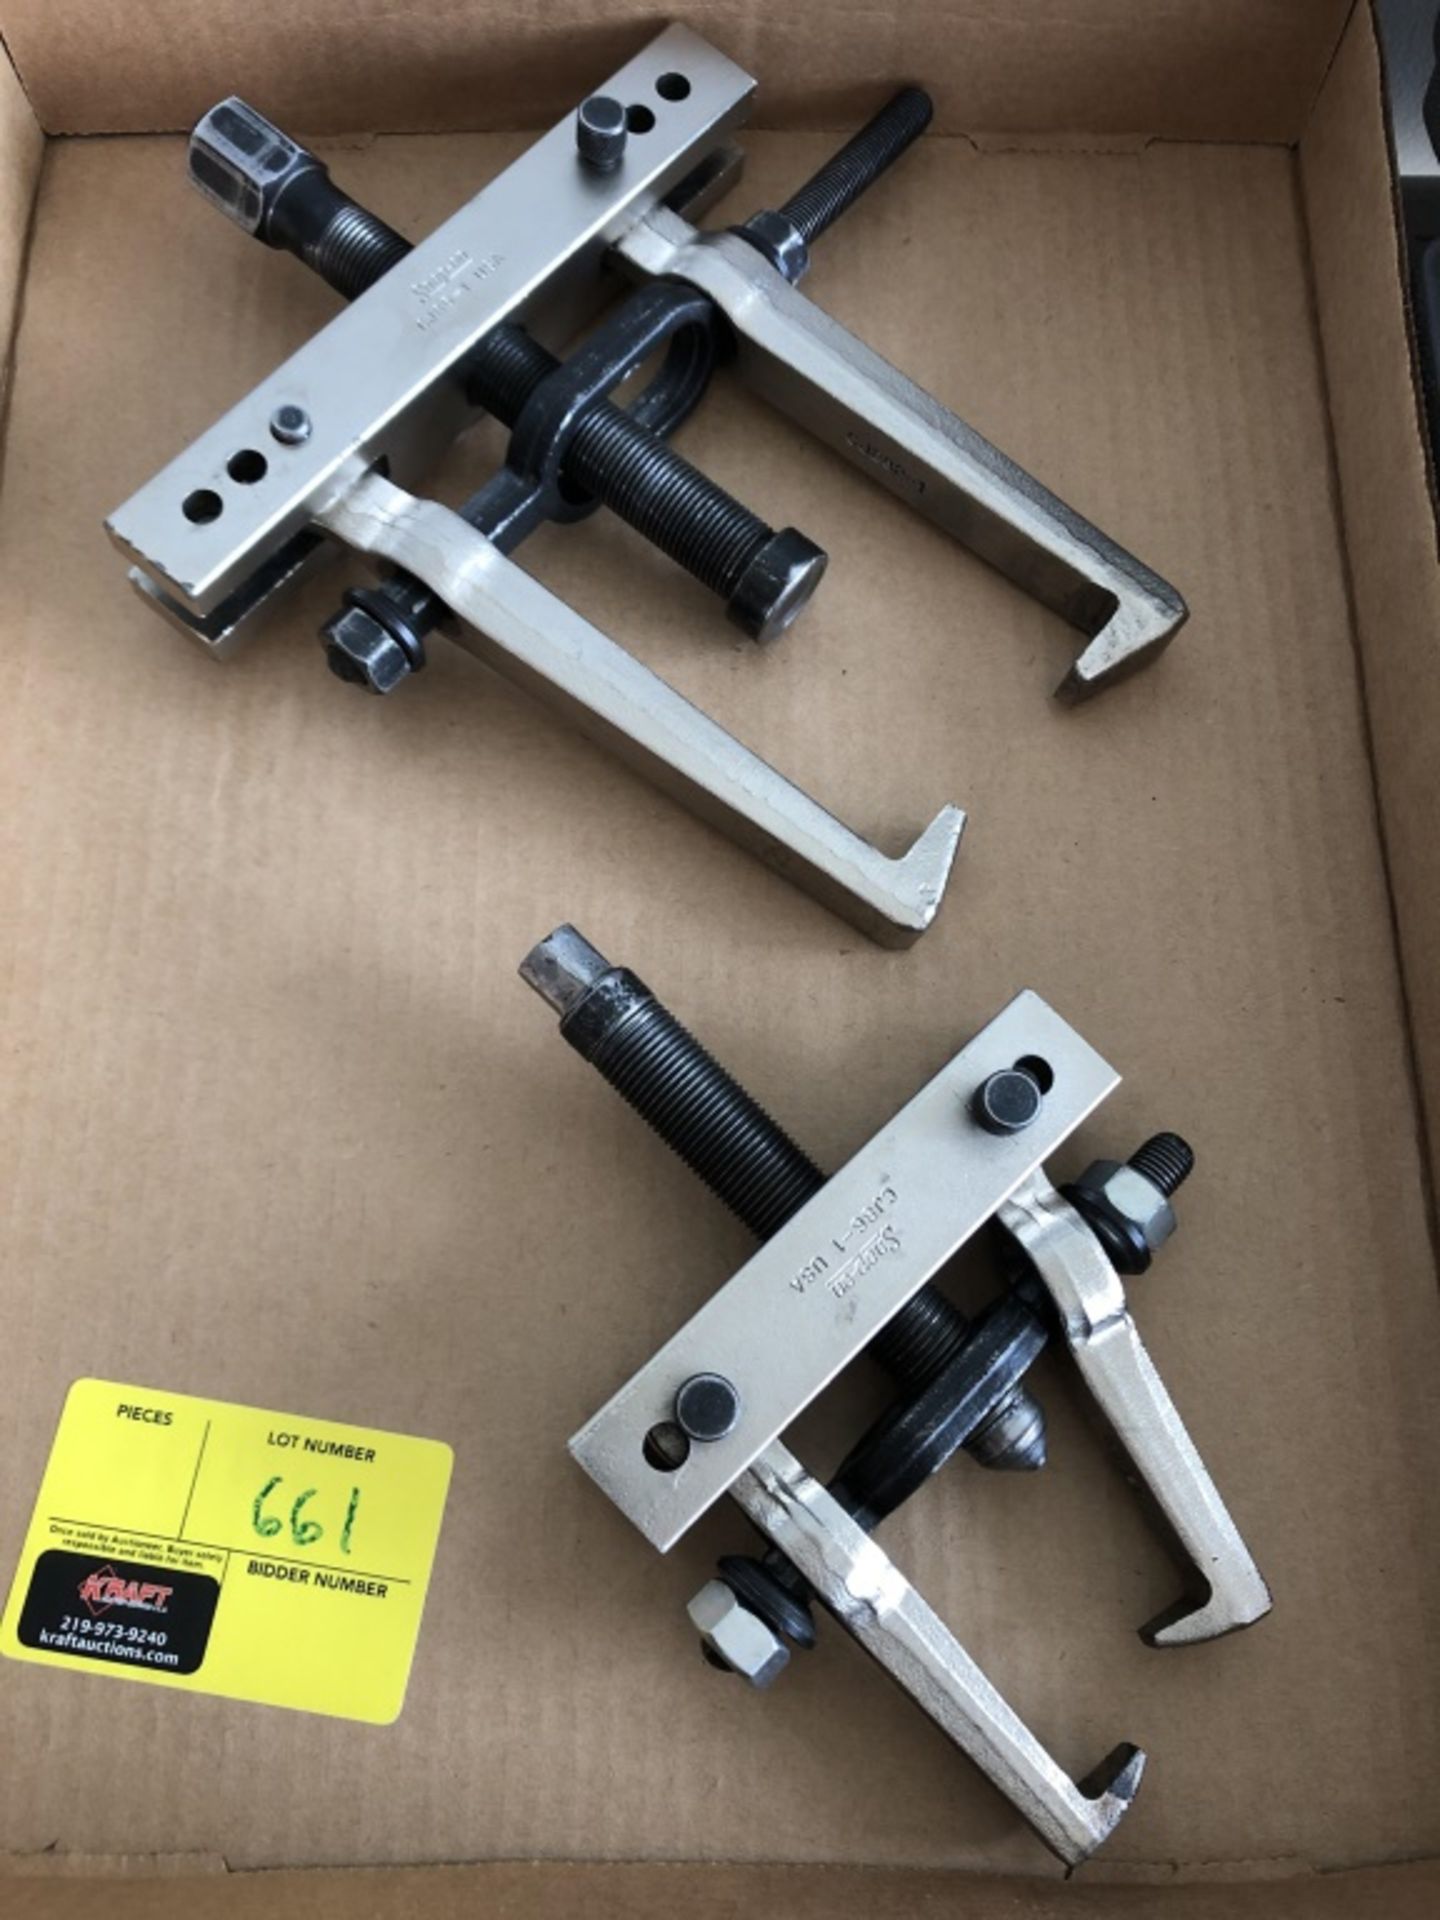 Snap-On Gear Pullers CJ86-1 and CJ282-1